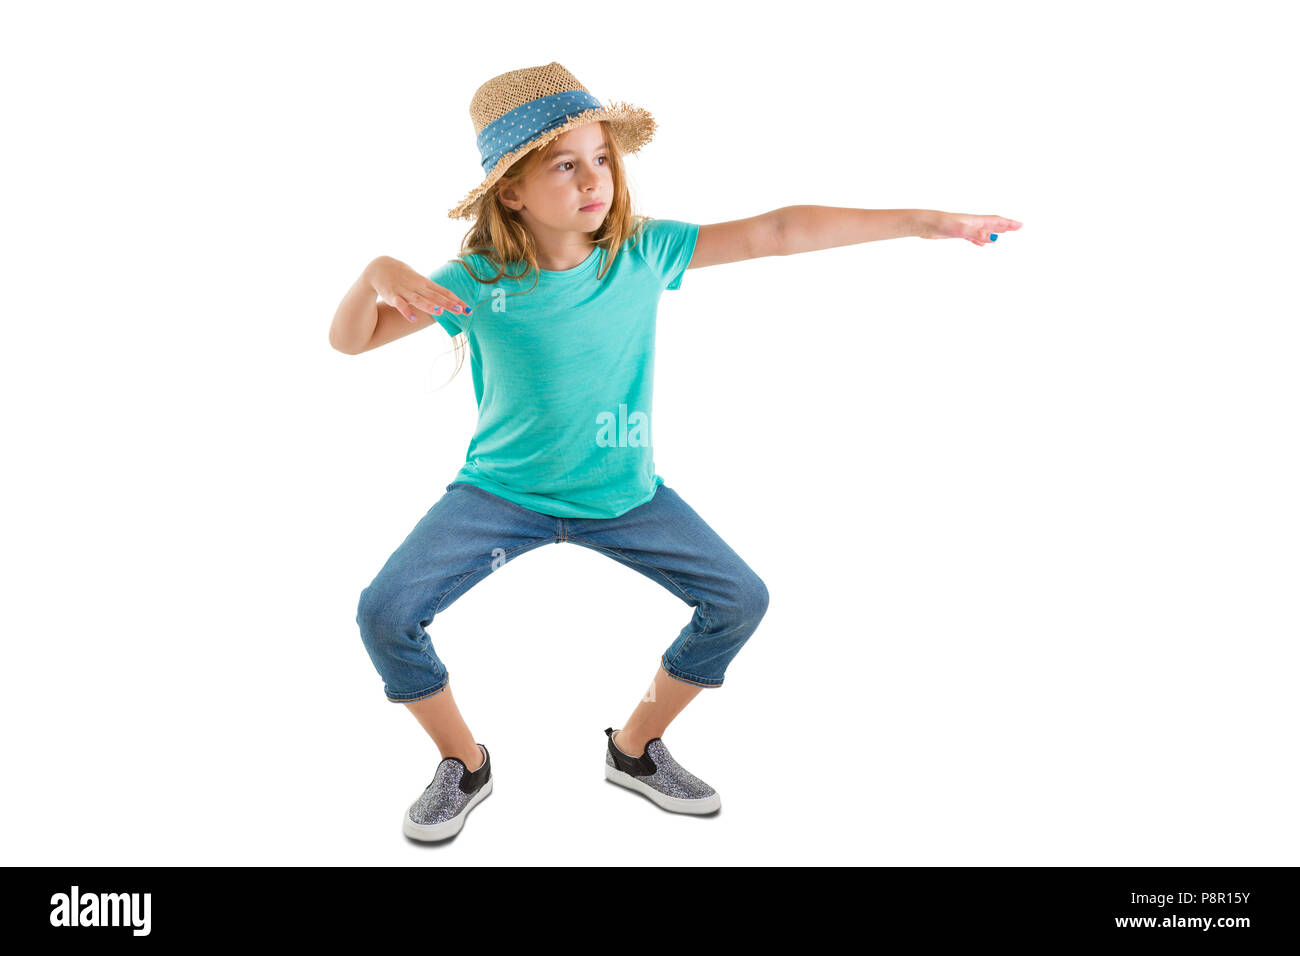 Young girl in casual denim jeans and a straw hat standing making funky dance moves bending at the knee with outstretched arms isolated on white Stock Photo